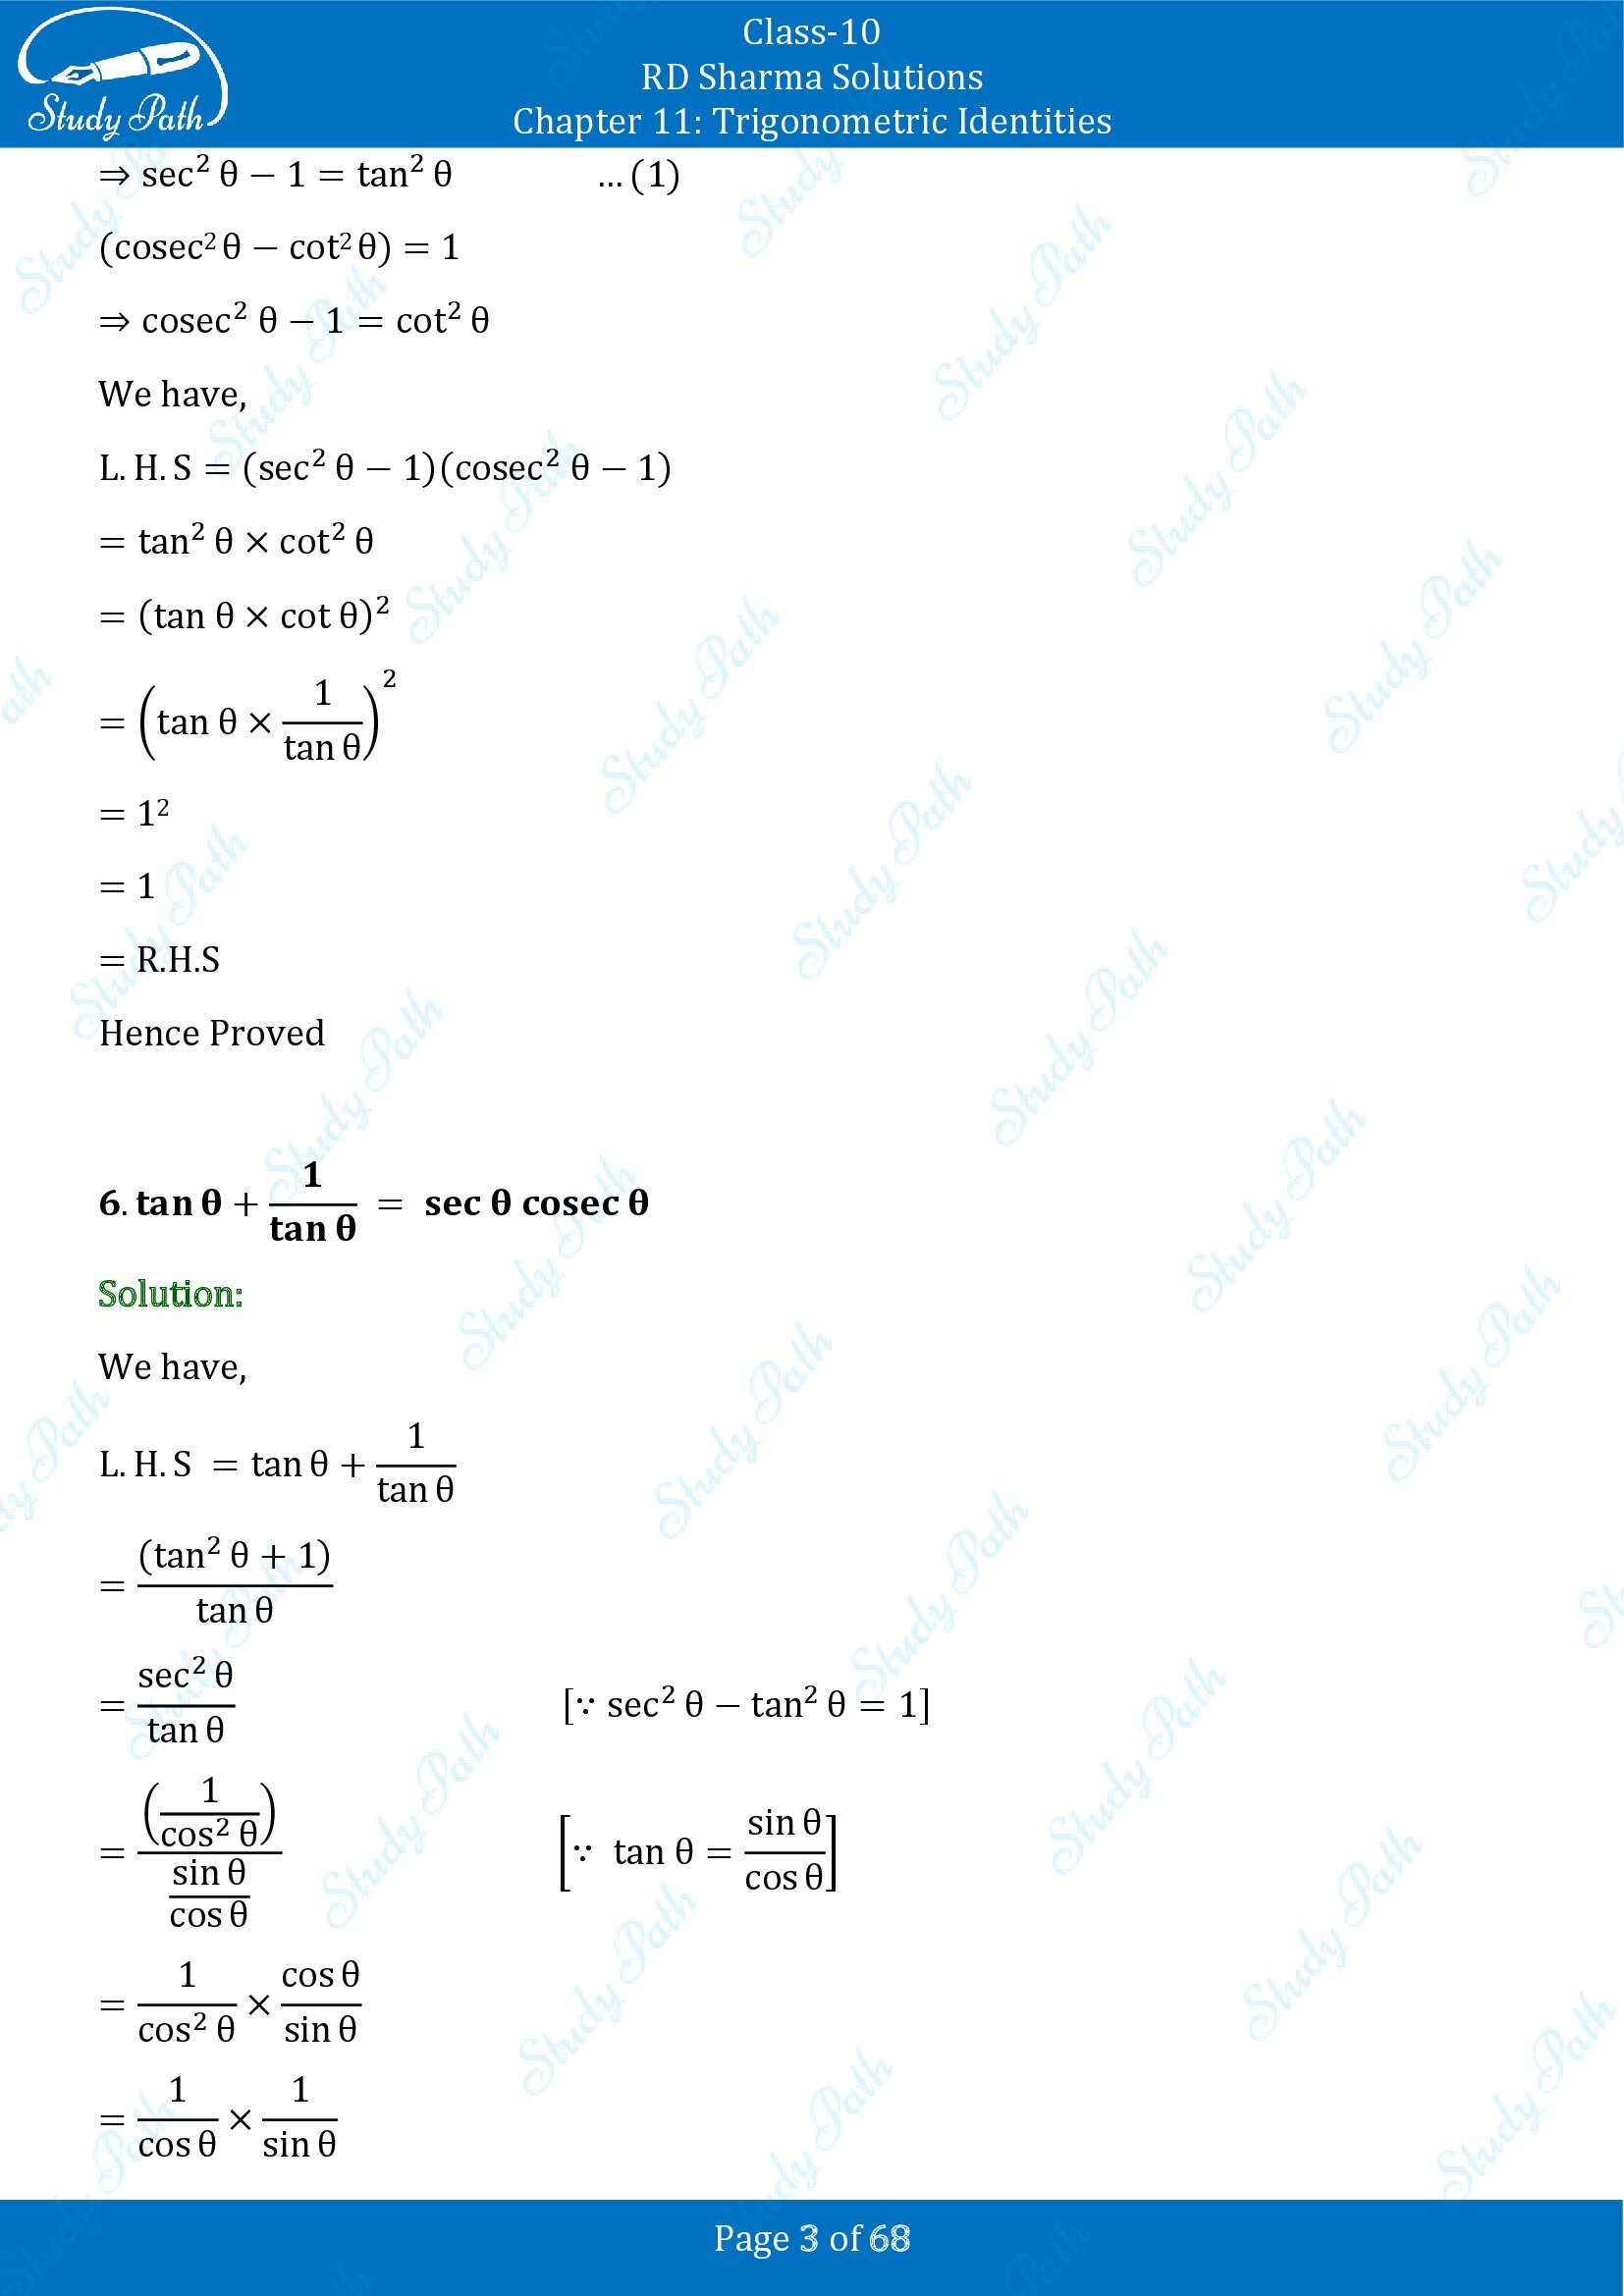 RD Sharma Solutions Class 10 Chapter 11 Trigonometric Identities Exercise 11.1 00003